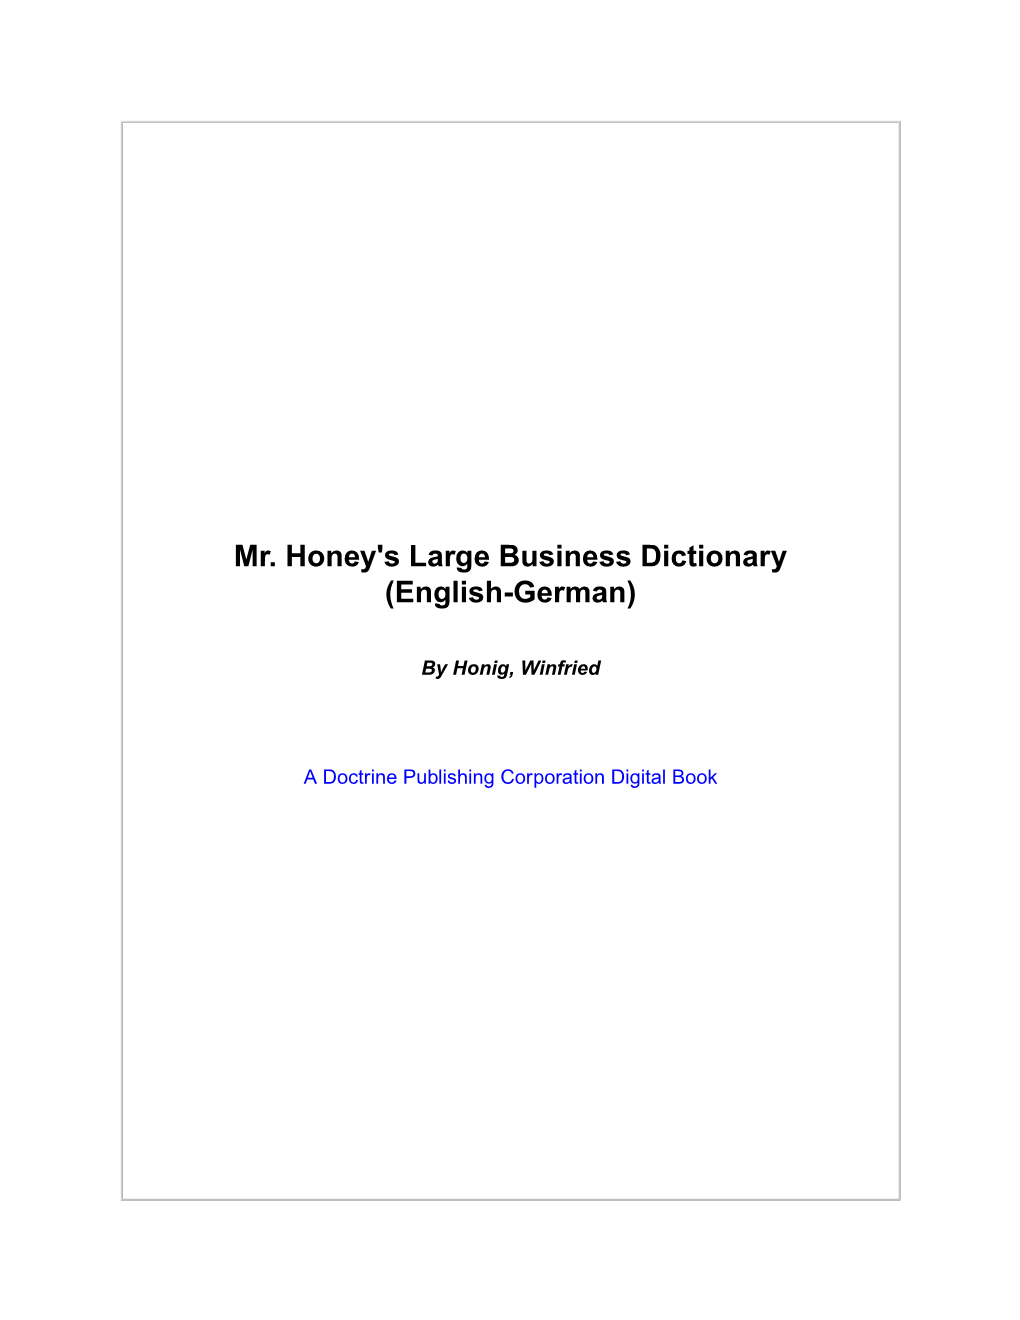 Mr. Honey's Large Business Dictionary (English-German)